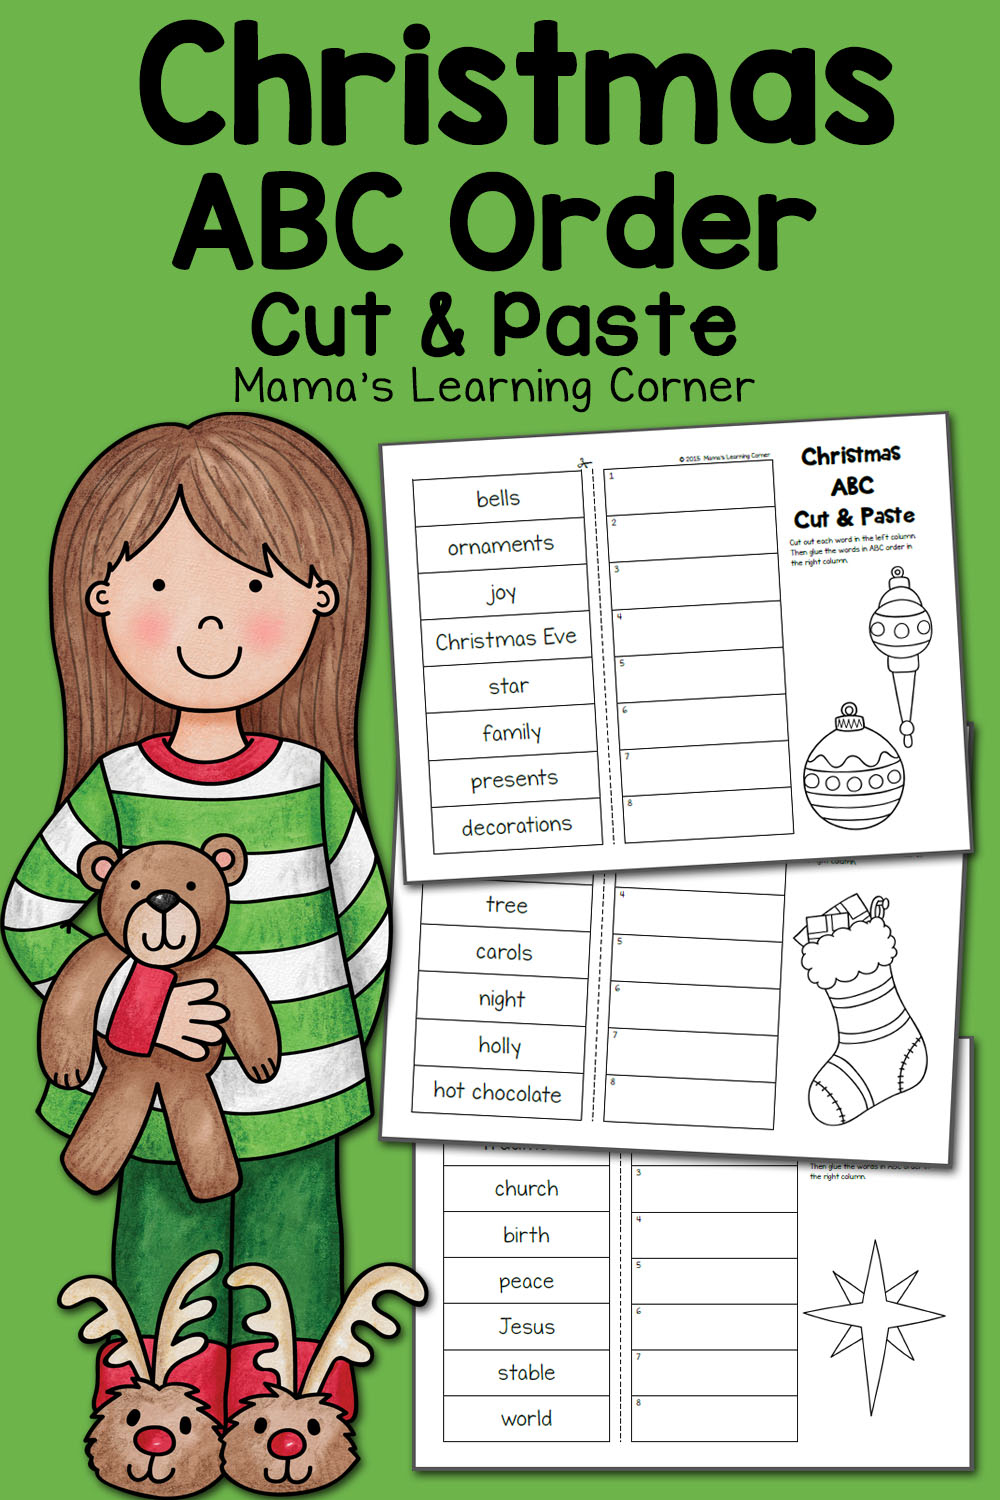 Christmas Abc Order Worksheets: Cut And Paste! - Mamas Learning Corner | Printable Abc Order Worksheets